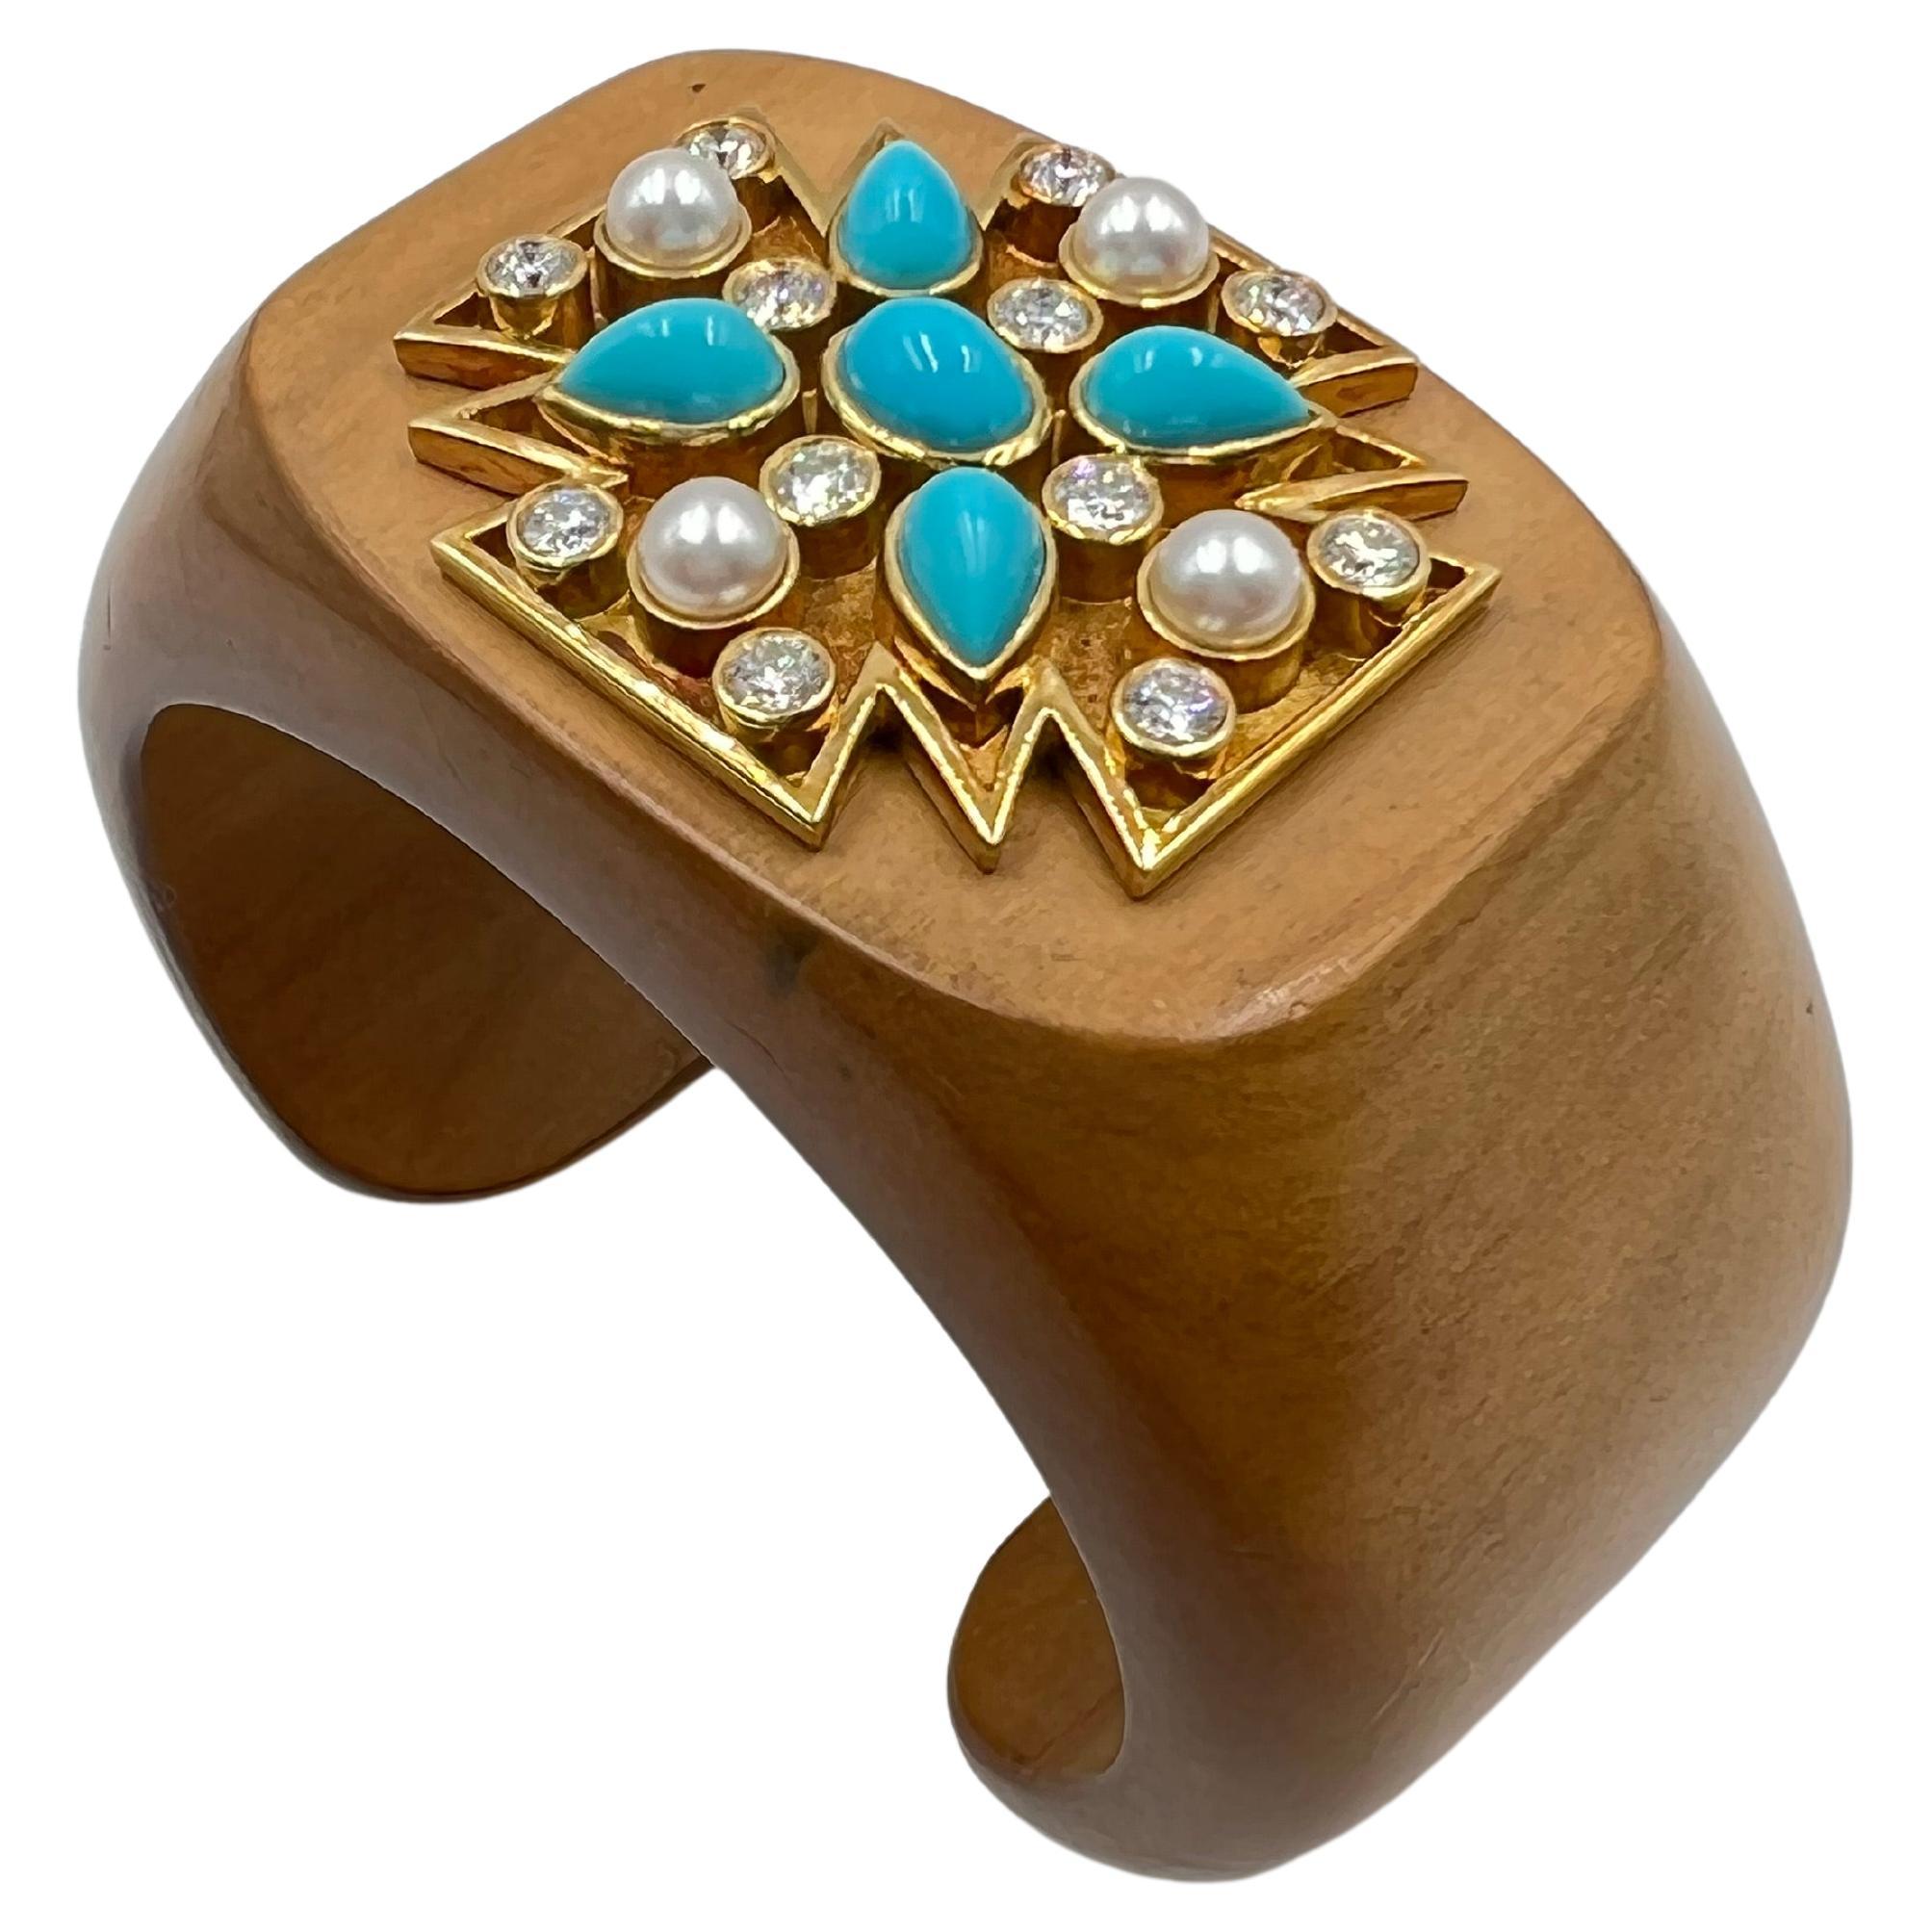 Carved sandalwood cuff featuring an 18k yellow gold Maltese cross motif. The cross centers an oval-shaped cabochon-cut turquoise surrounded by four pear-shaped cabochon-cut turquoise, four cultured pearls and twelve round-cut diamonds.  Signed